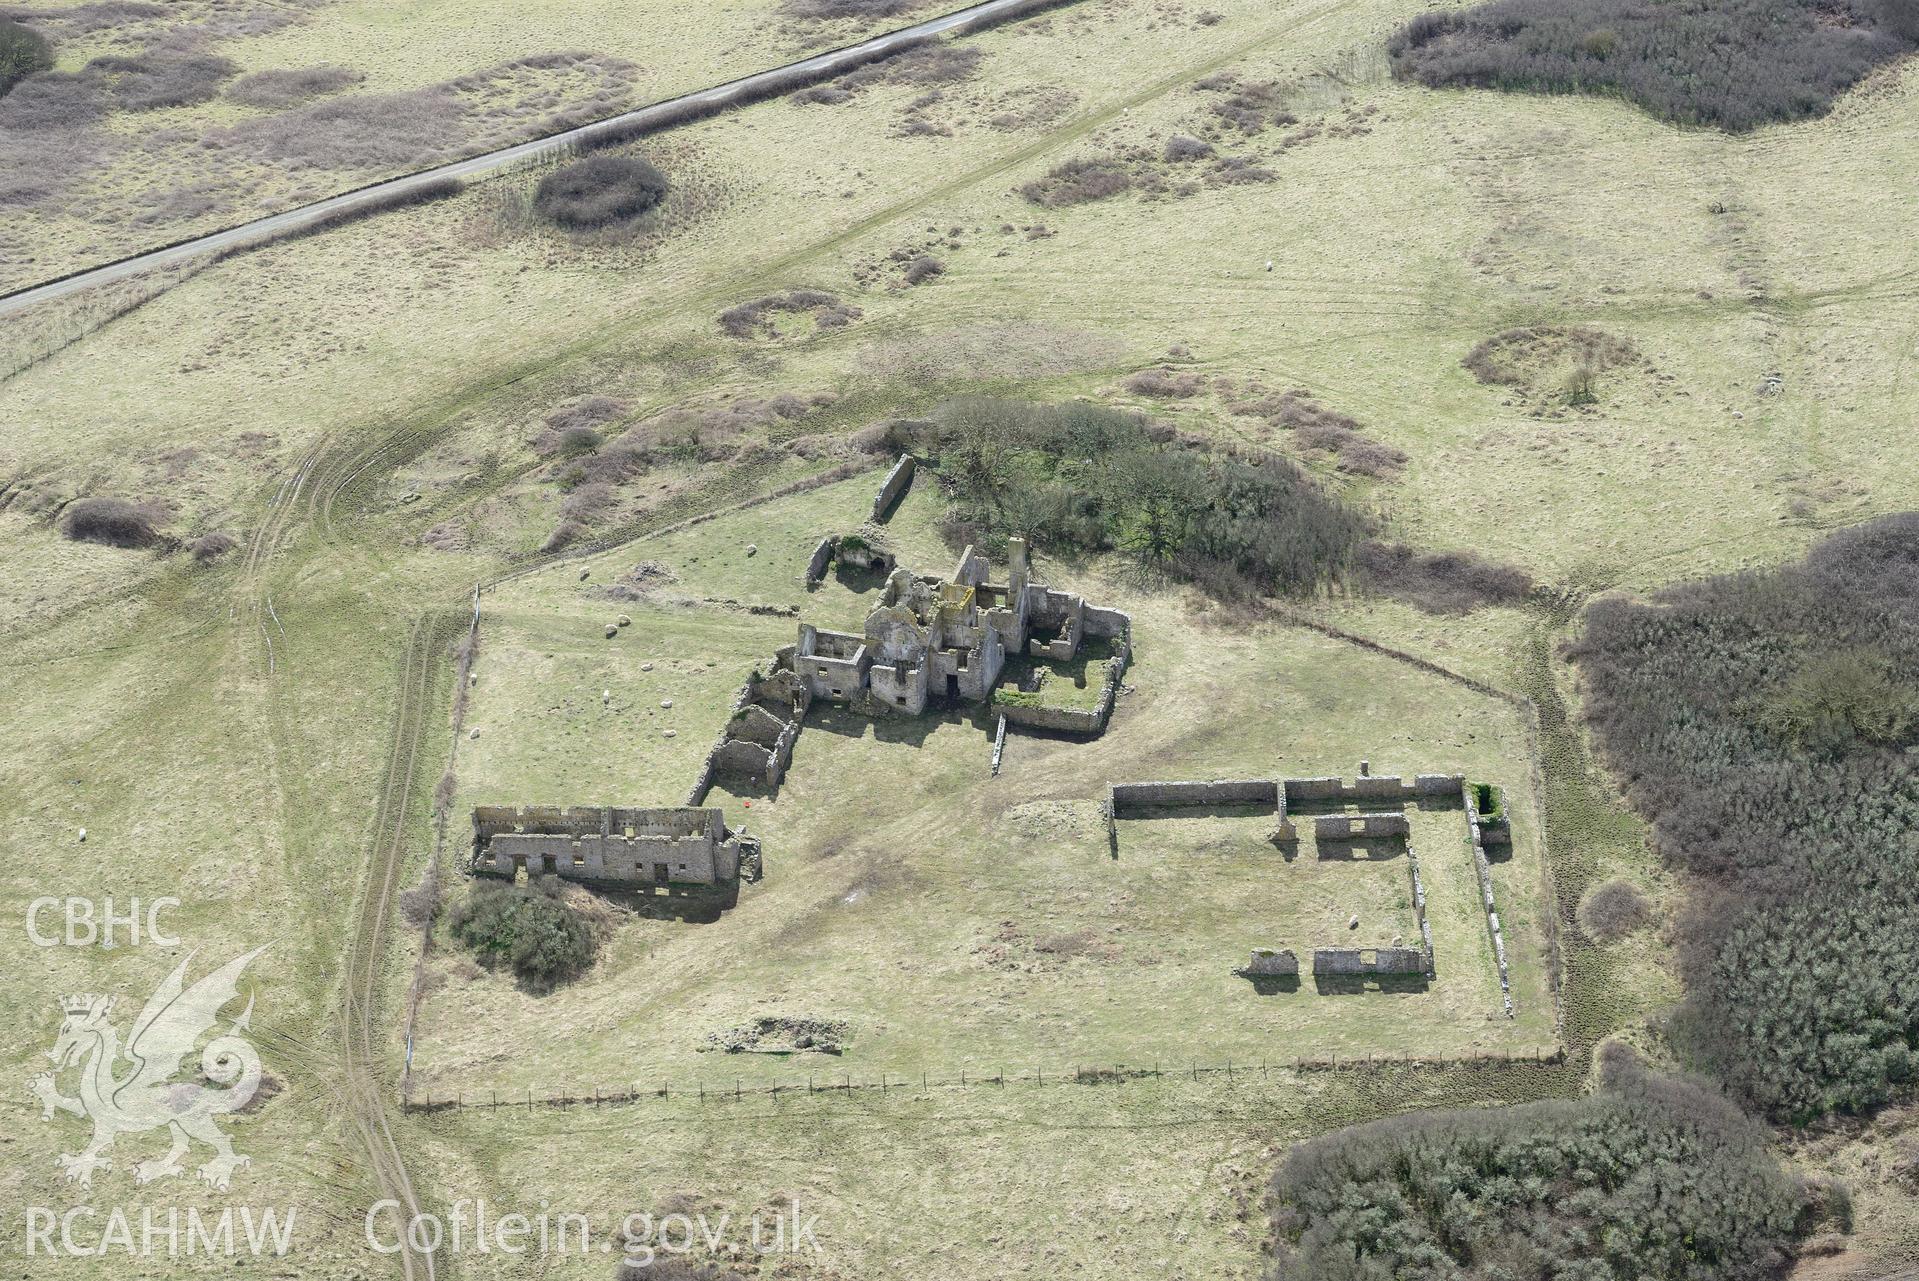 Pricaston Farmhouse. Baseline aerial reconnaissance survey for the CHERISH Project. ? Crown: CHERISH PROJECT 2018. Produced with EU funds through the Ireland Wales Co-operation Programme 2014-2020. All material made freely available through the Open Government Licence.